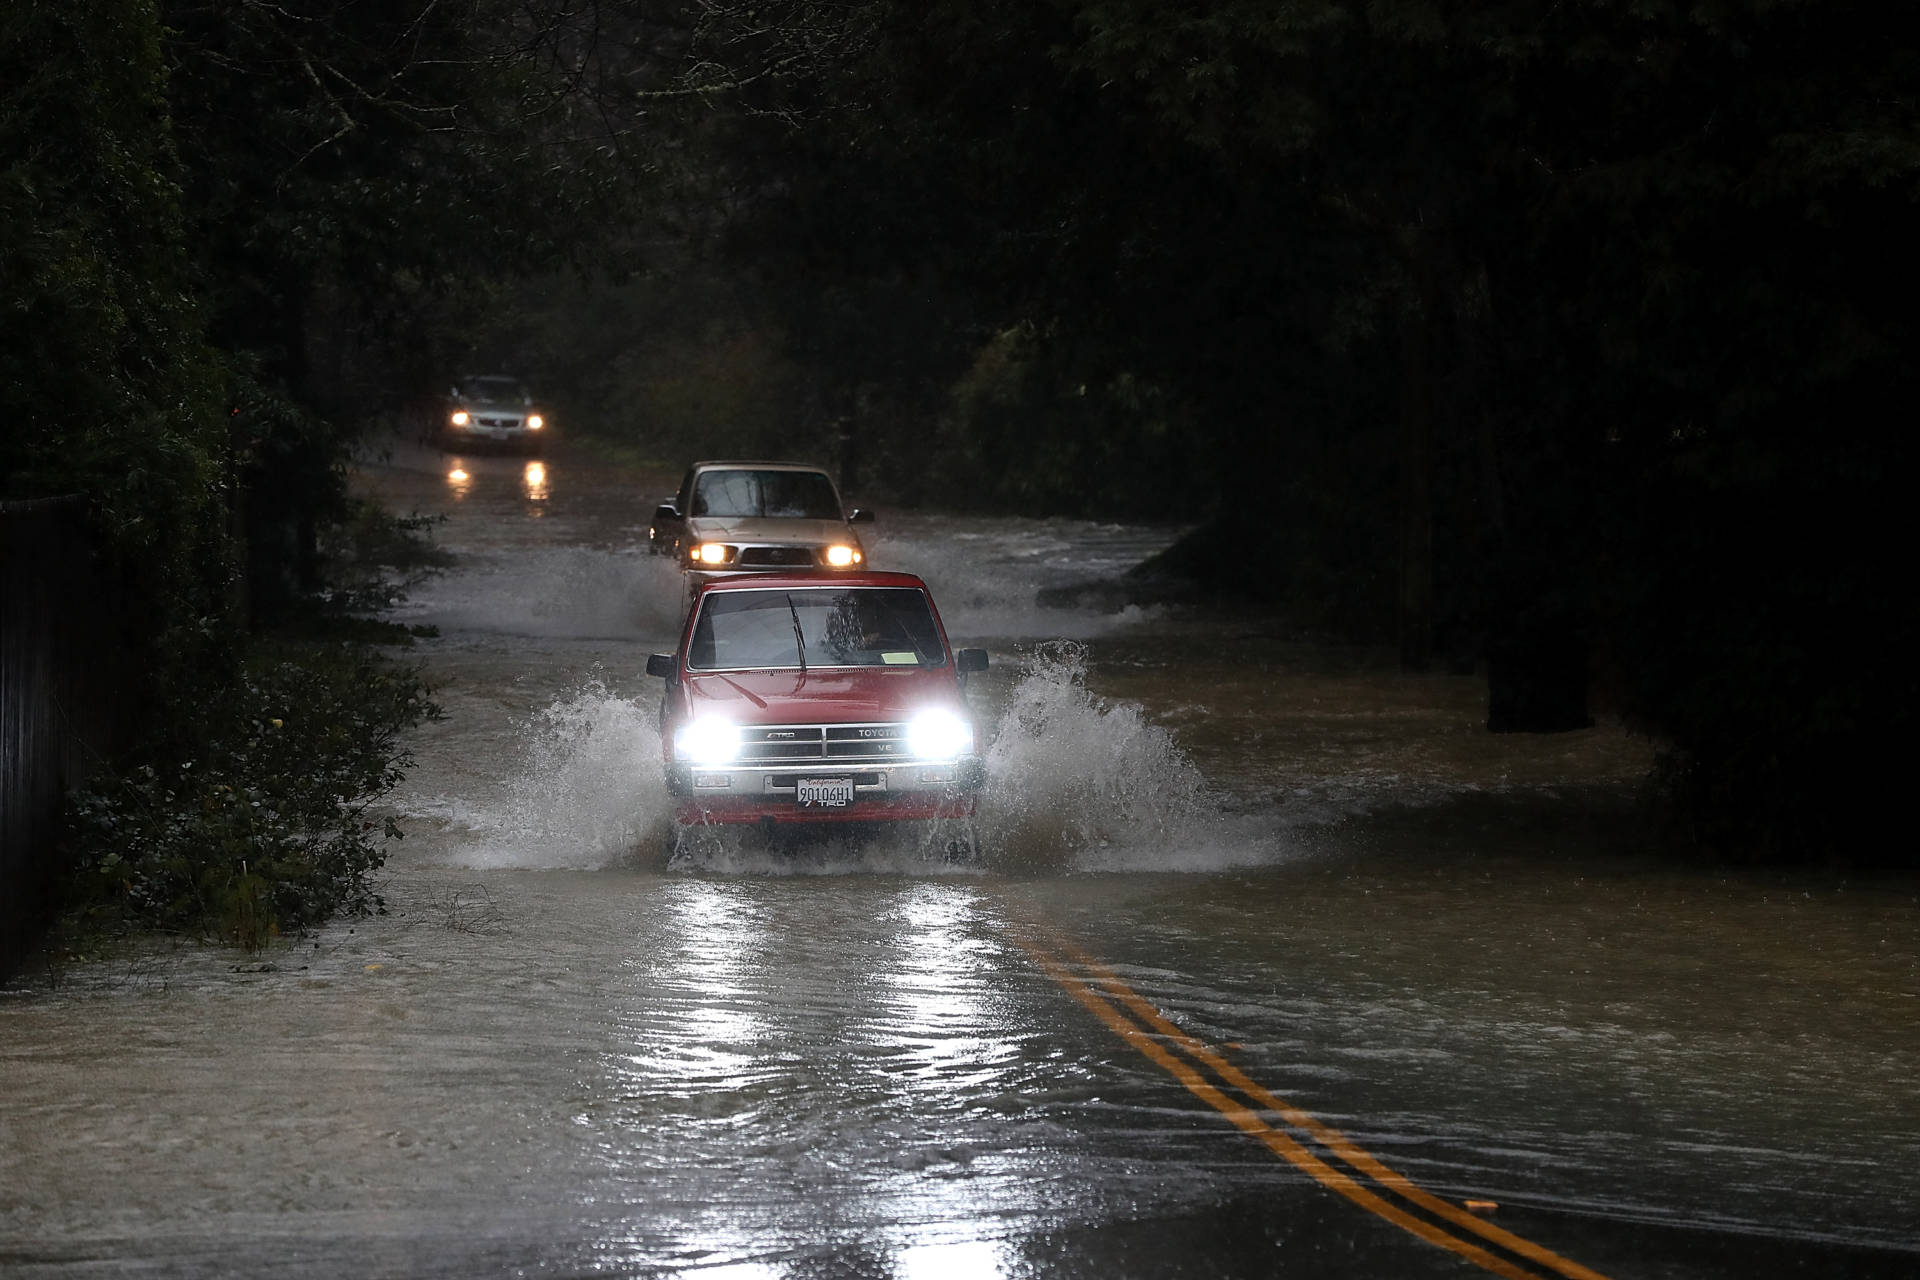 Cars drive on a flooded road in Guerneville in January 2017. The Russian River town is just downstream from Venado, a site in the northern Sonoma County hills that is one of the rainiest locations in California.  Justin Sullivan/Getty Images